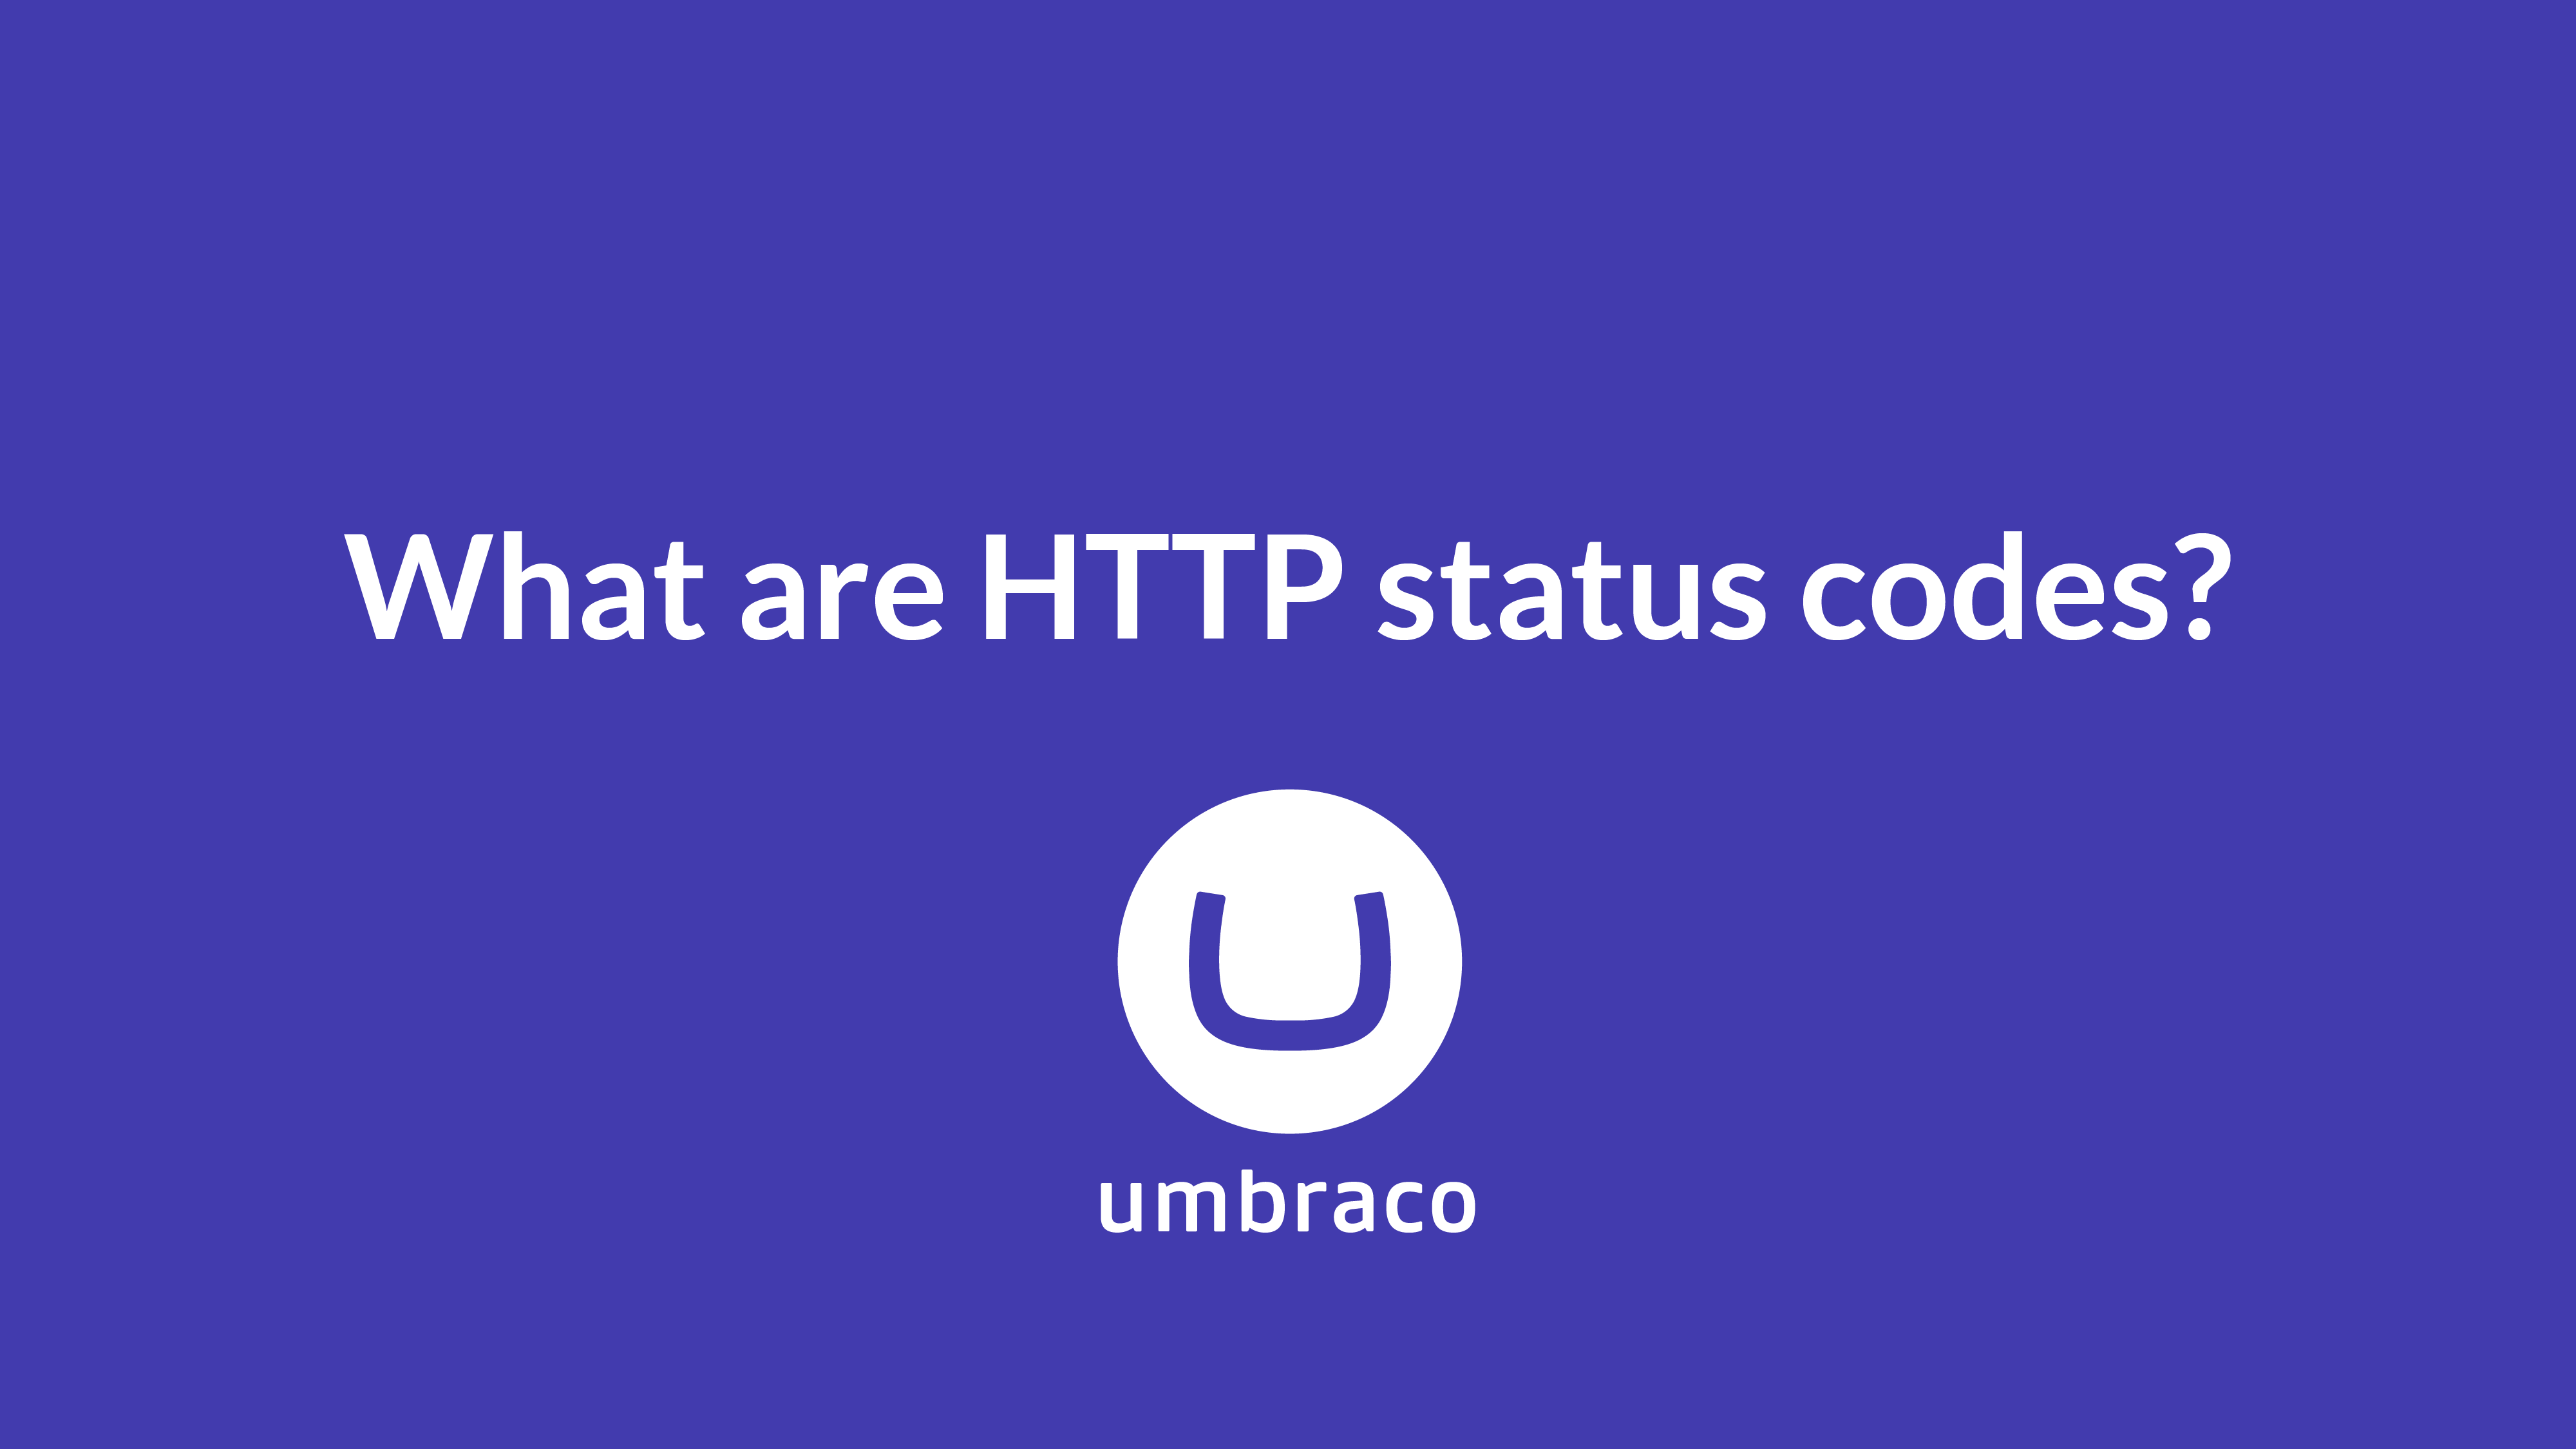 HTTP Status Codes: All 63 explained - including FAQ & Video